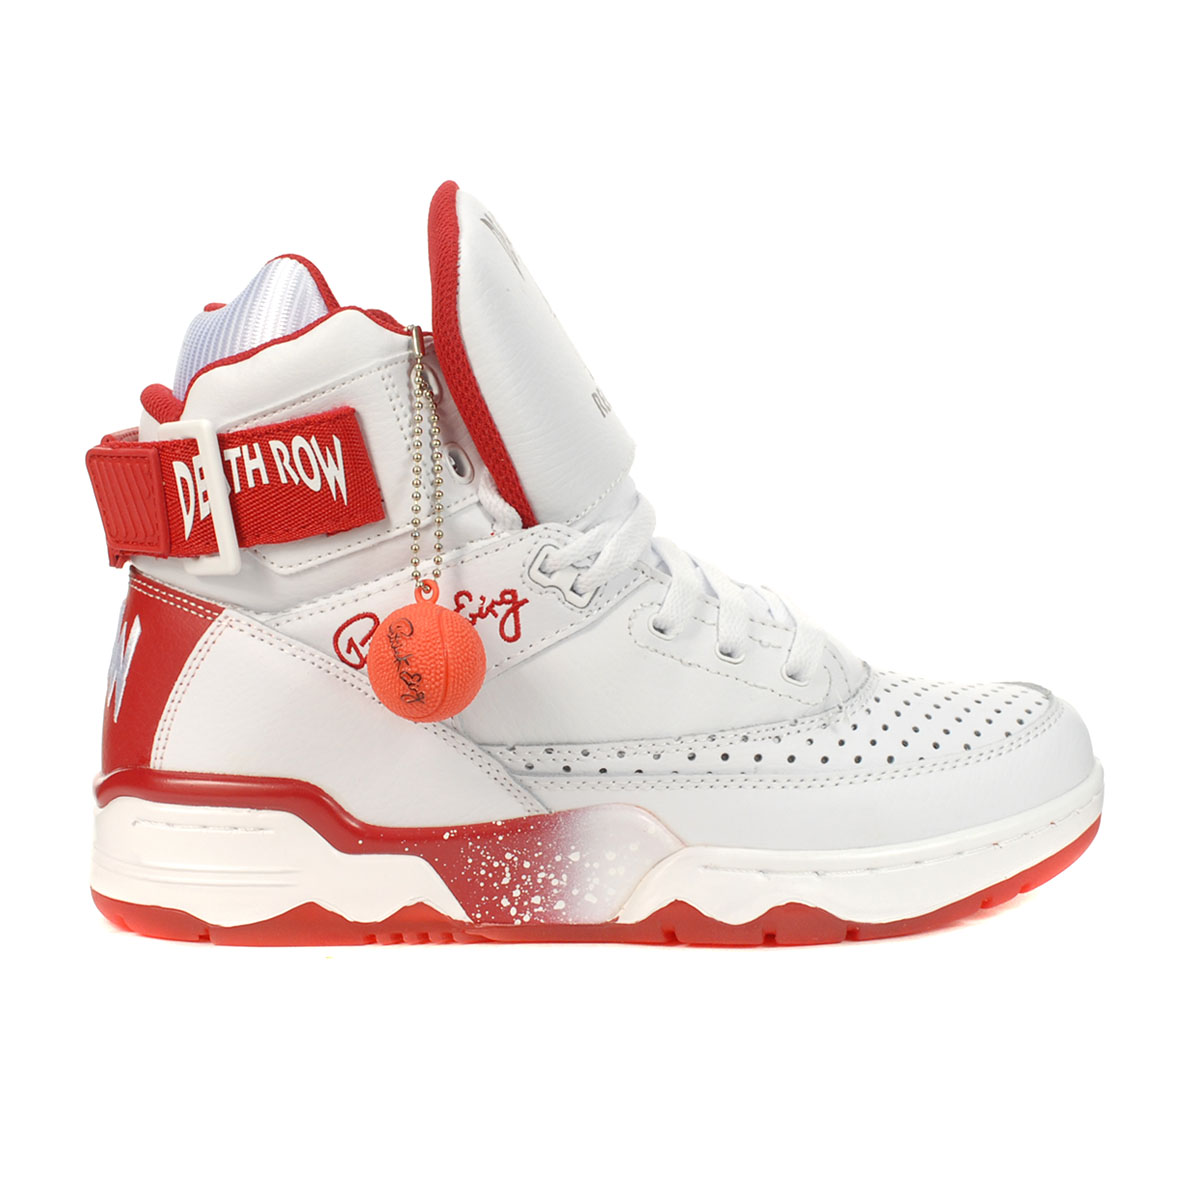 Patrick Ewing 33 HI x Death Row Records White/Red Basketball Shoes